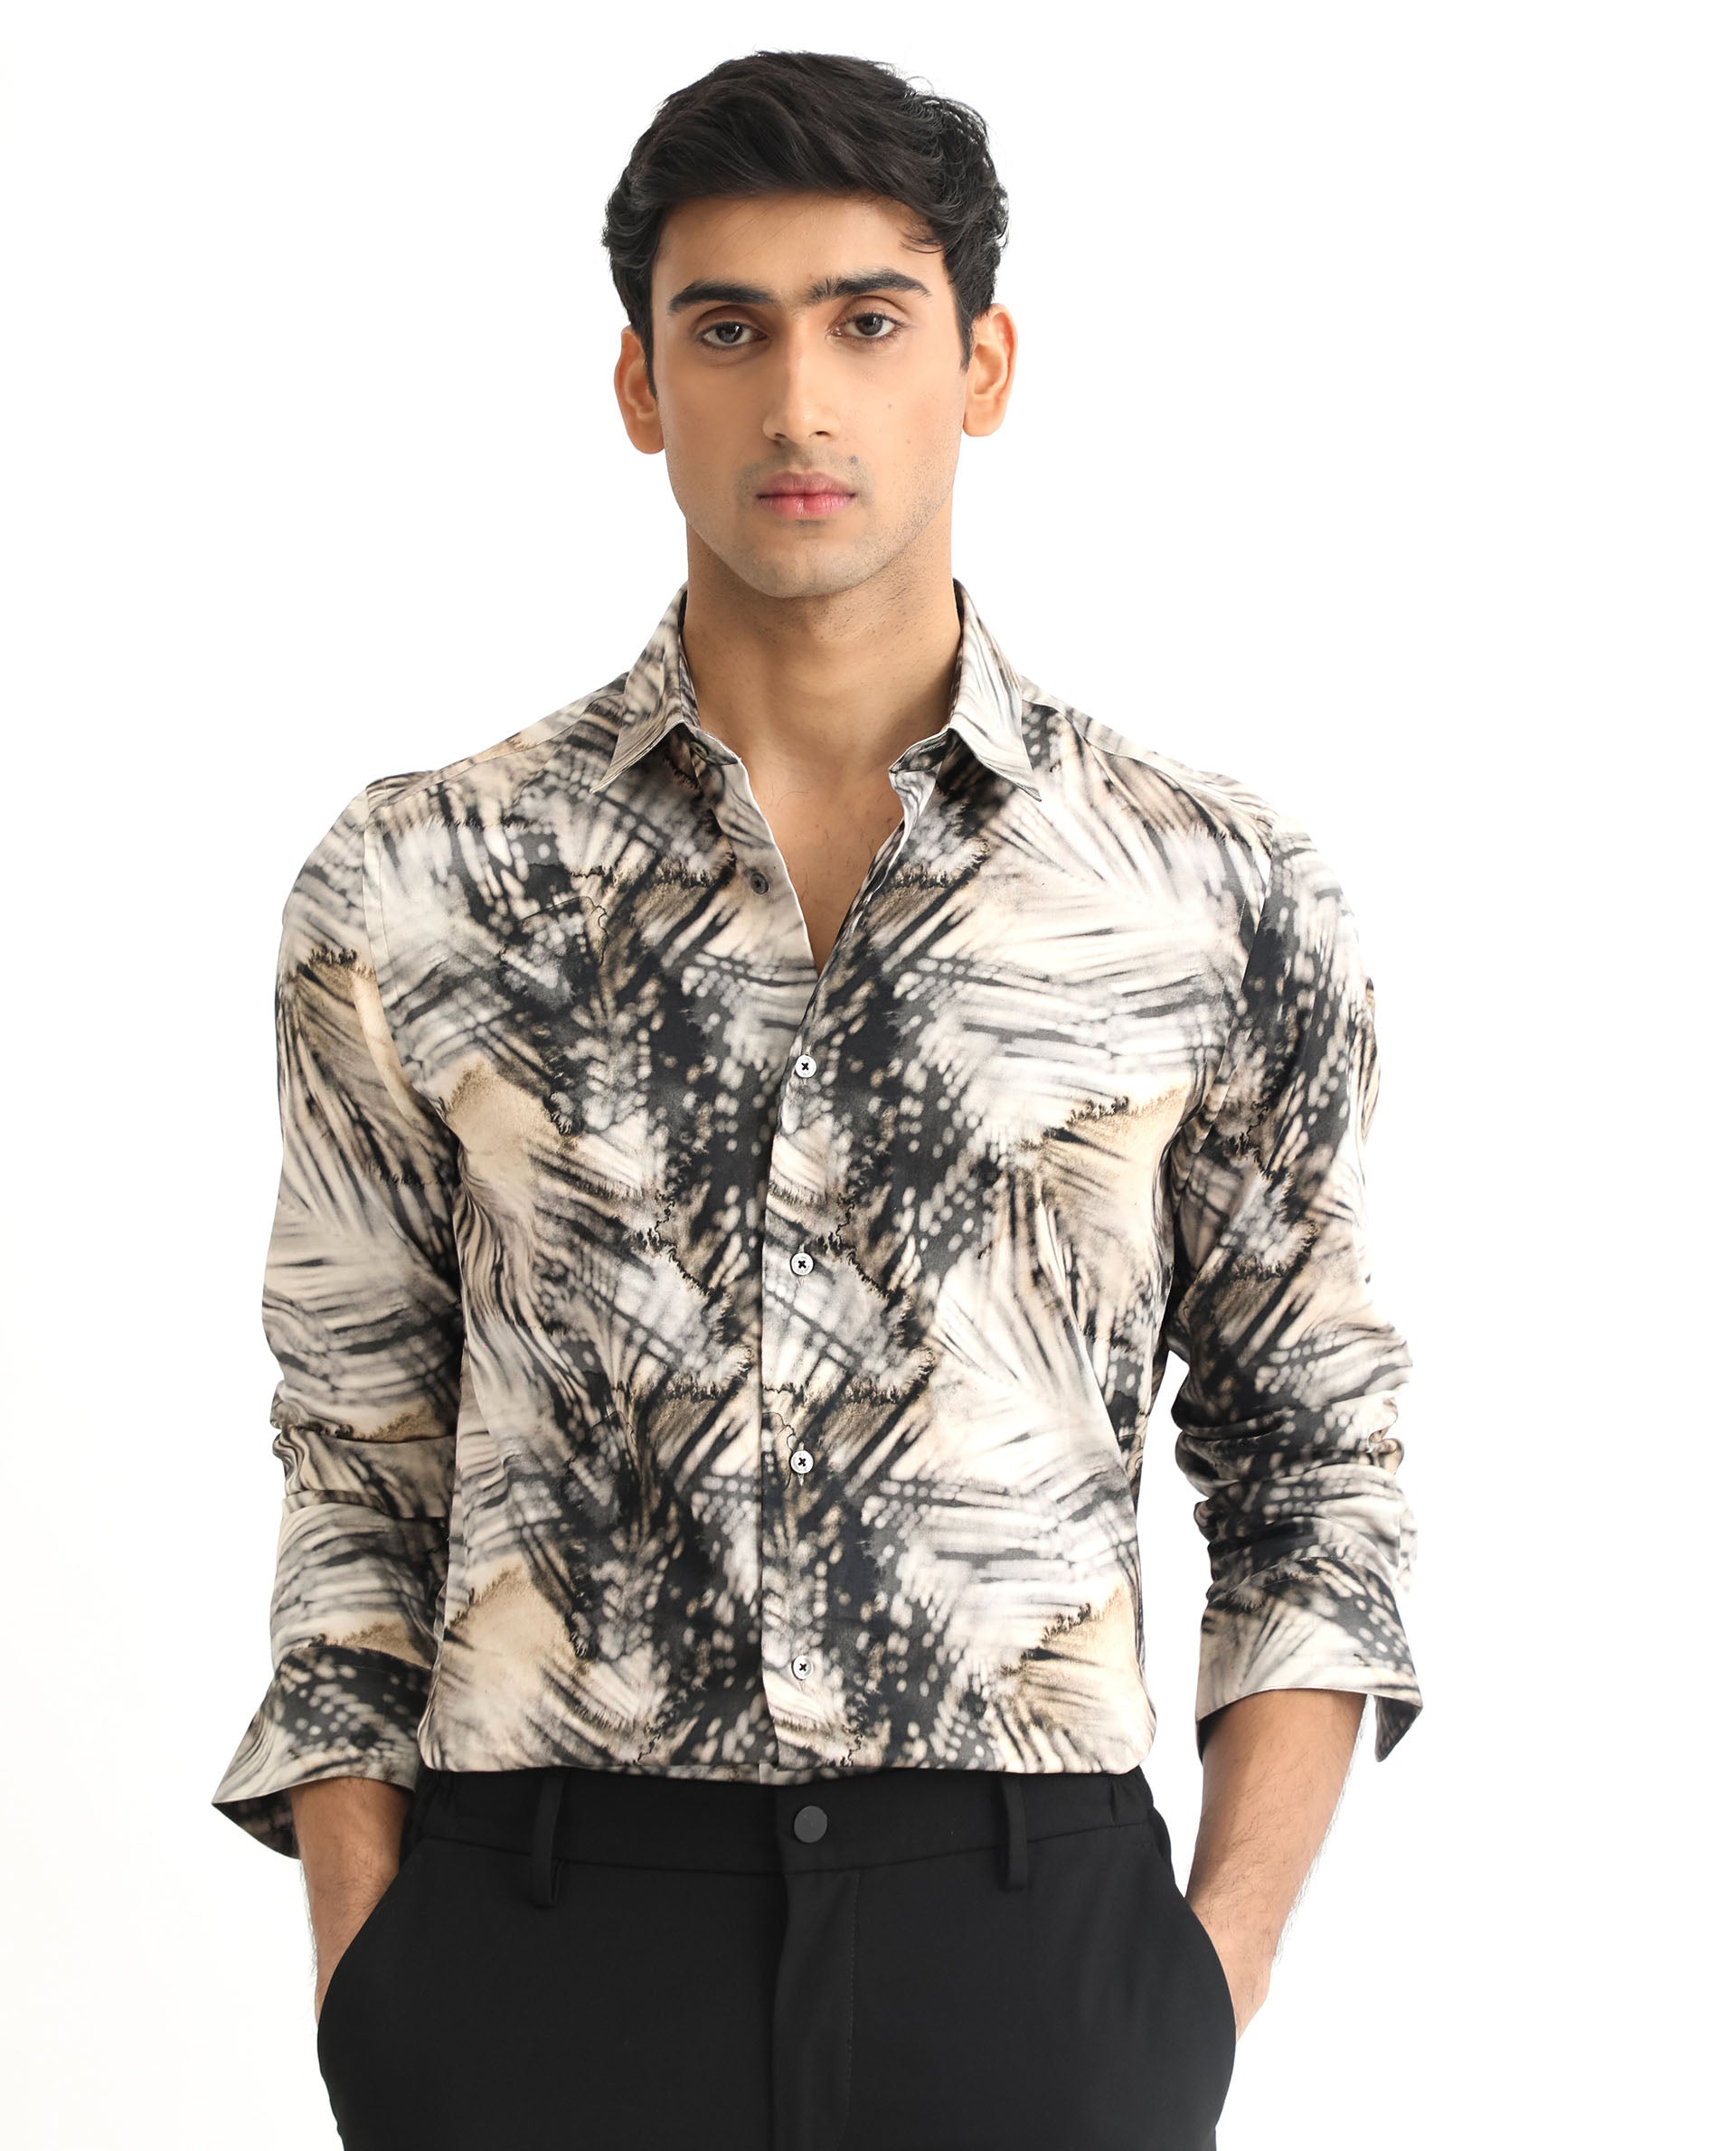 Light Weight Cotton Printed Shirt For Summer Supplier, Manufacturer in New  Delhi at Latest Price